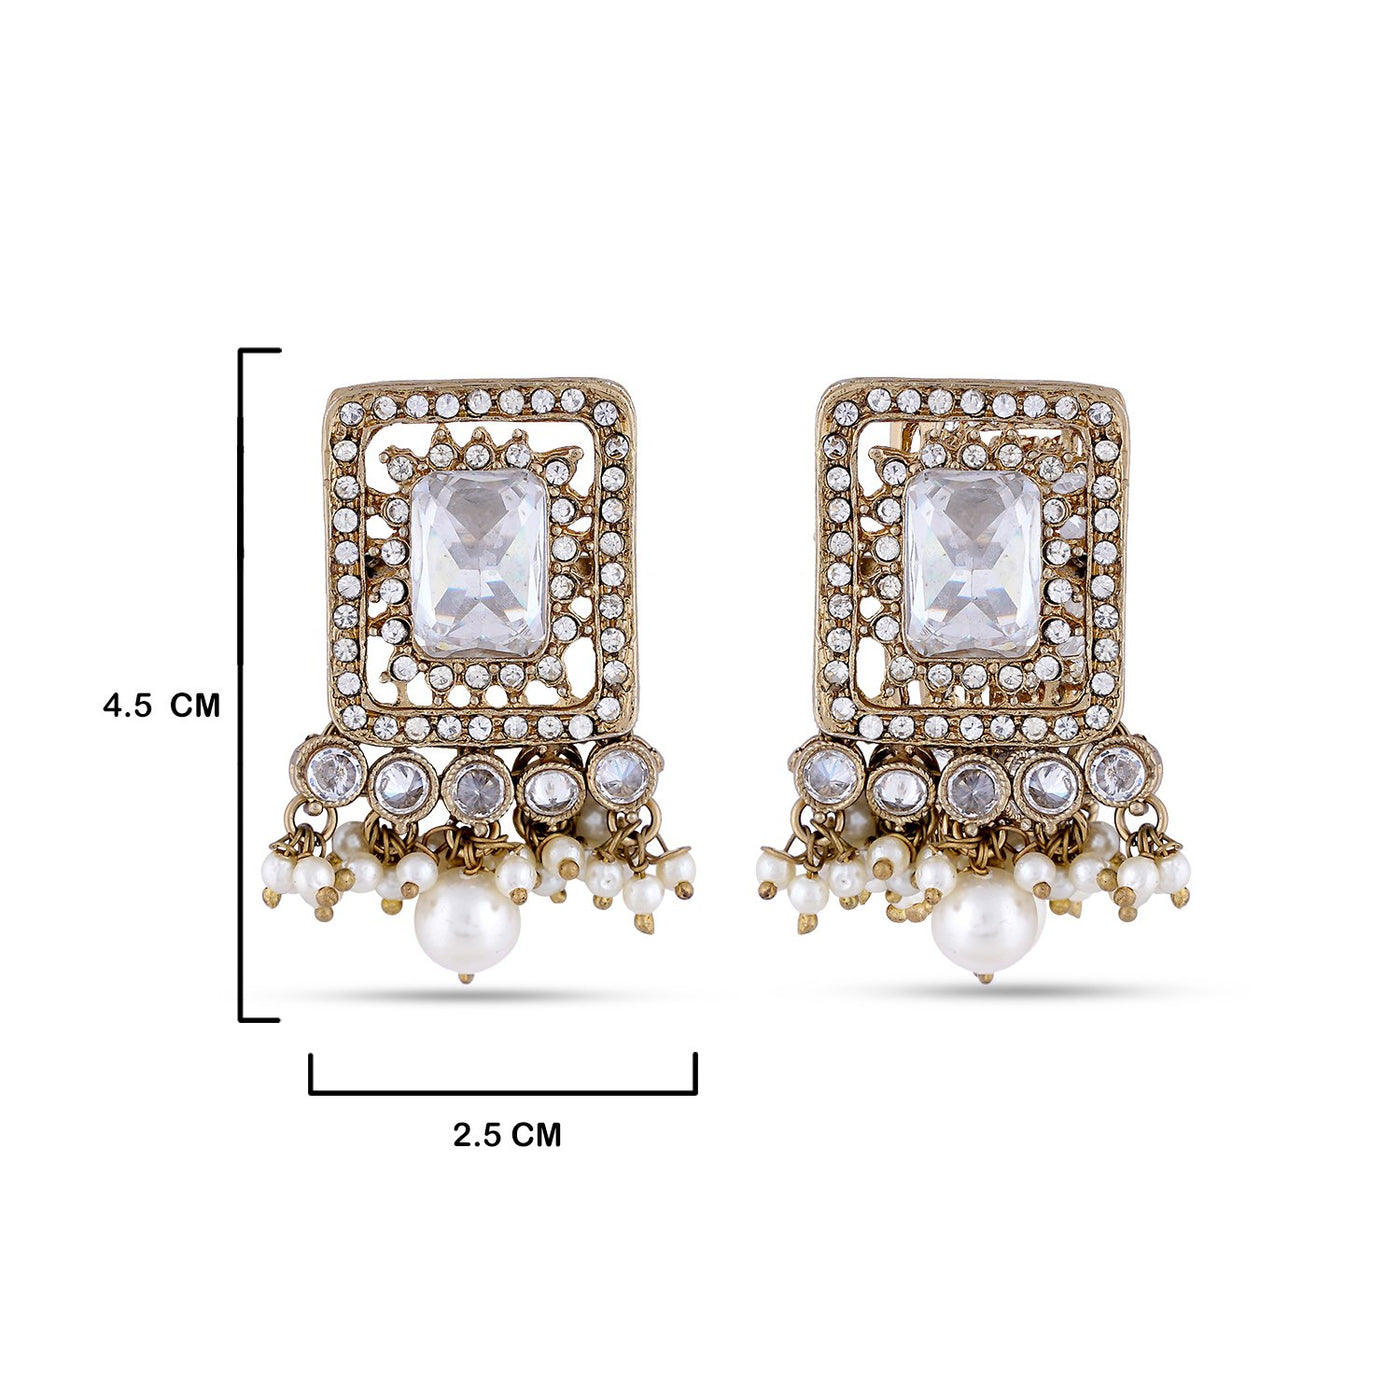  White Stoned Kundan Earrings with measurements in cm. 4.5cm by 2.5cm.